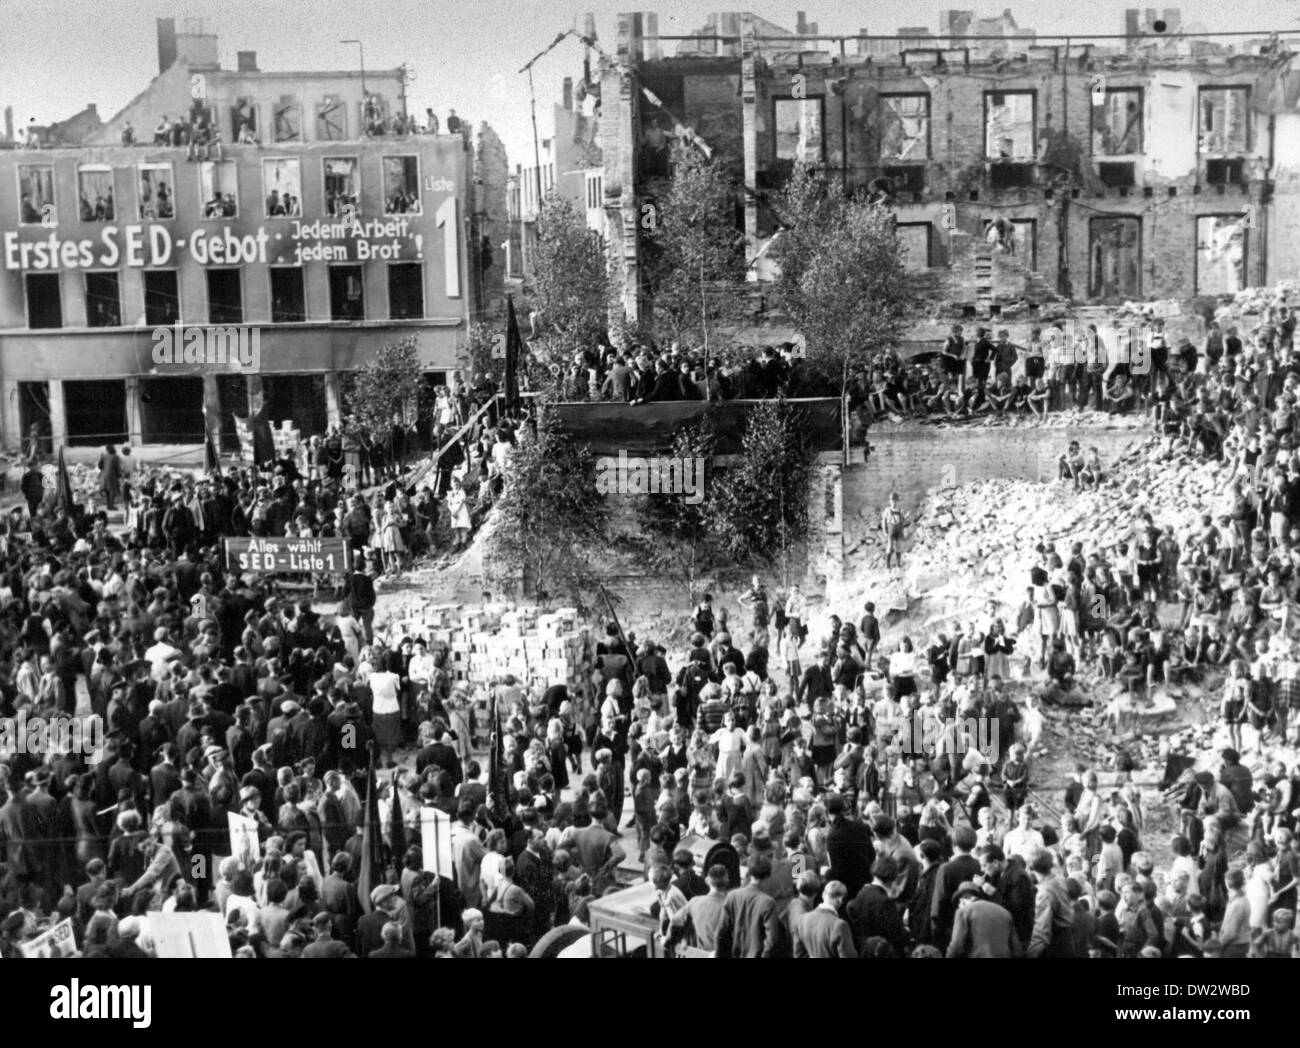 People gather for a rally during the first municipal election in the devastated center of Frankfurt (Oder), Germany, 1946. The lettering on the building facade and a poster reads 'First SED precept: Work and bread for everyone' and 'Everyone elects the SED - List 1'. Photo: Kotterba Collection - NO WIRE SERVICE (Inferior quality due to historical template) Stock Photo